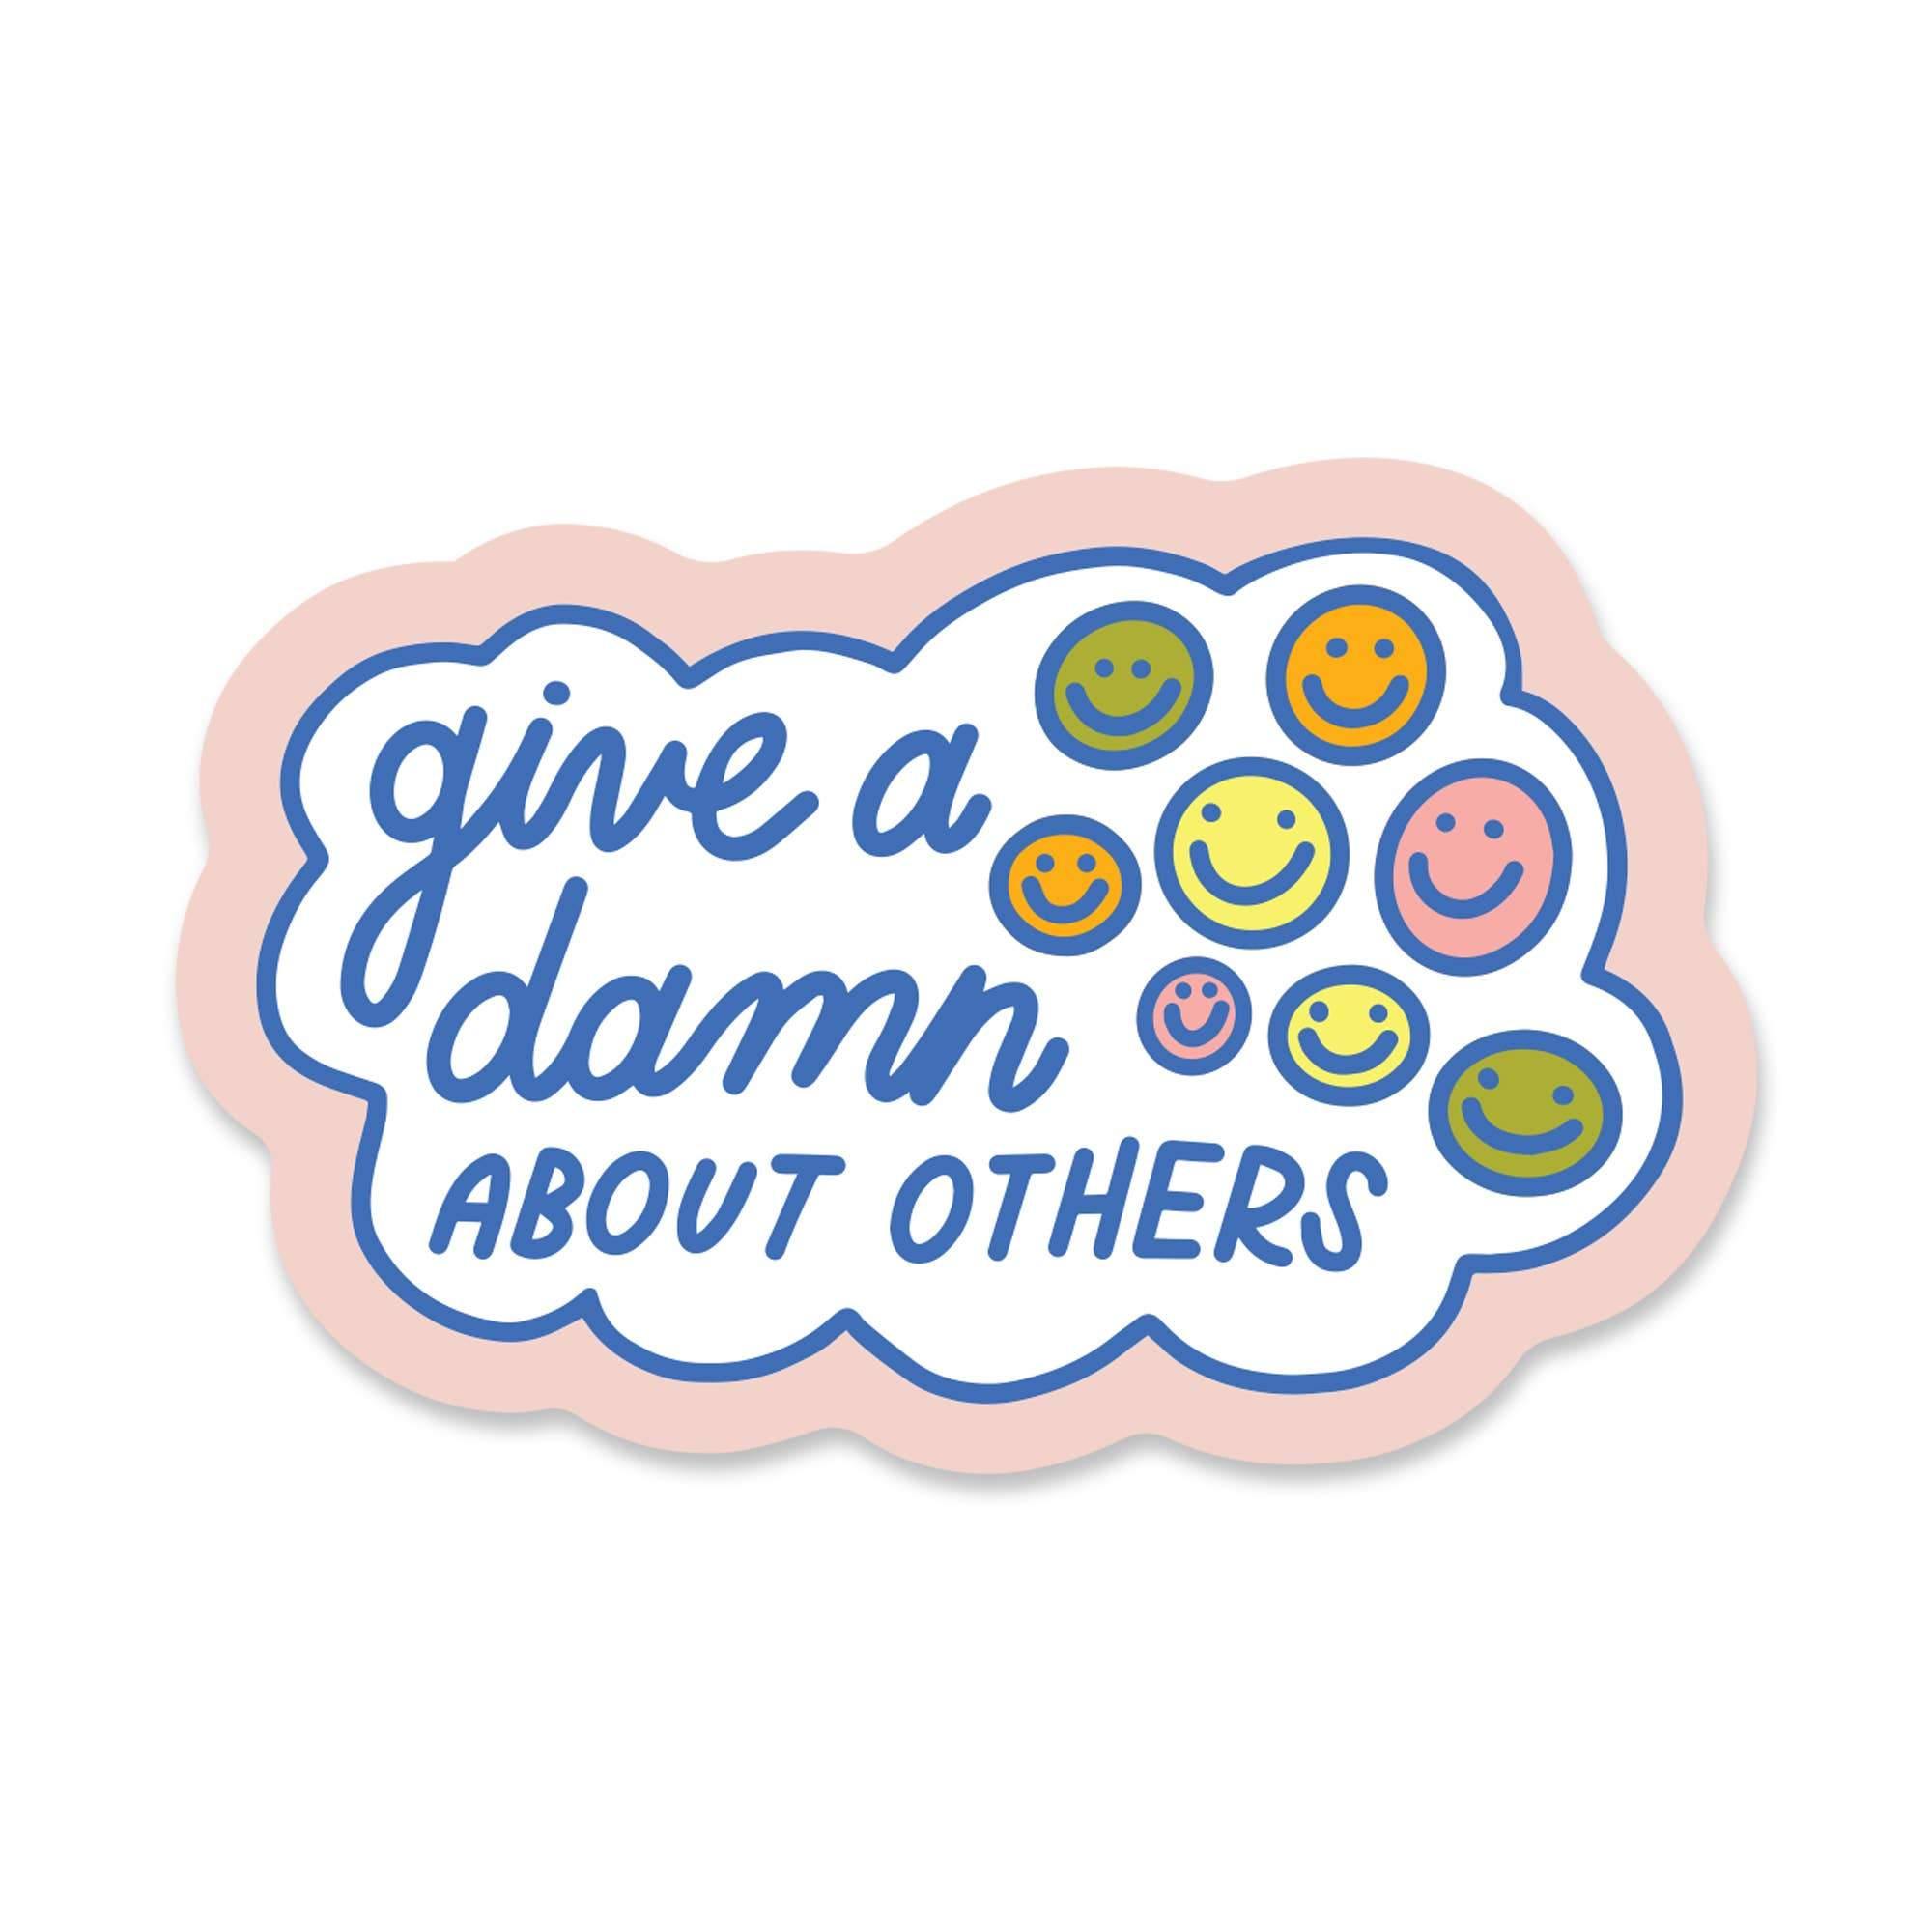 Give a Damn About Others Sticker - DIGS